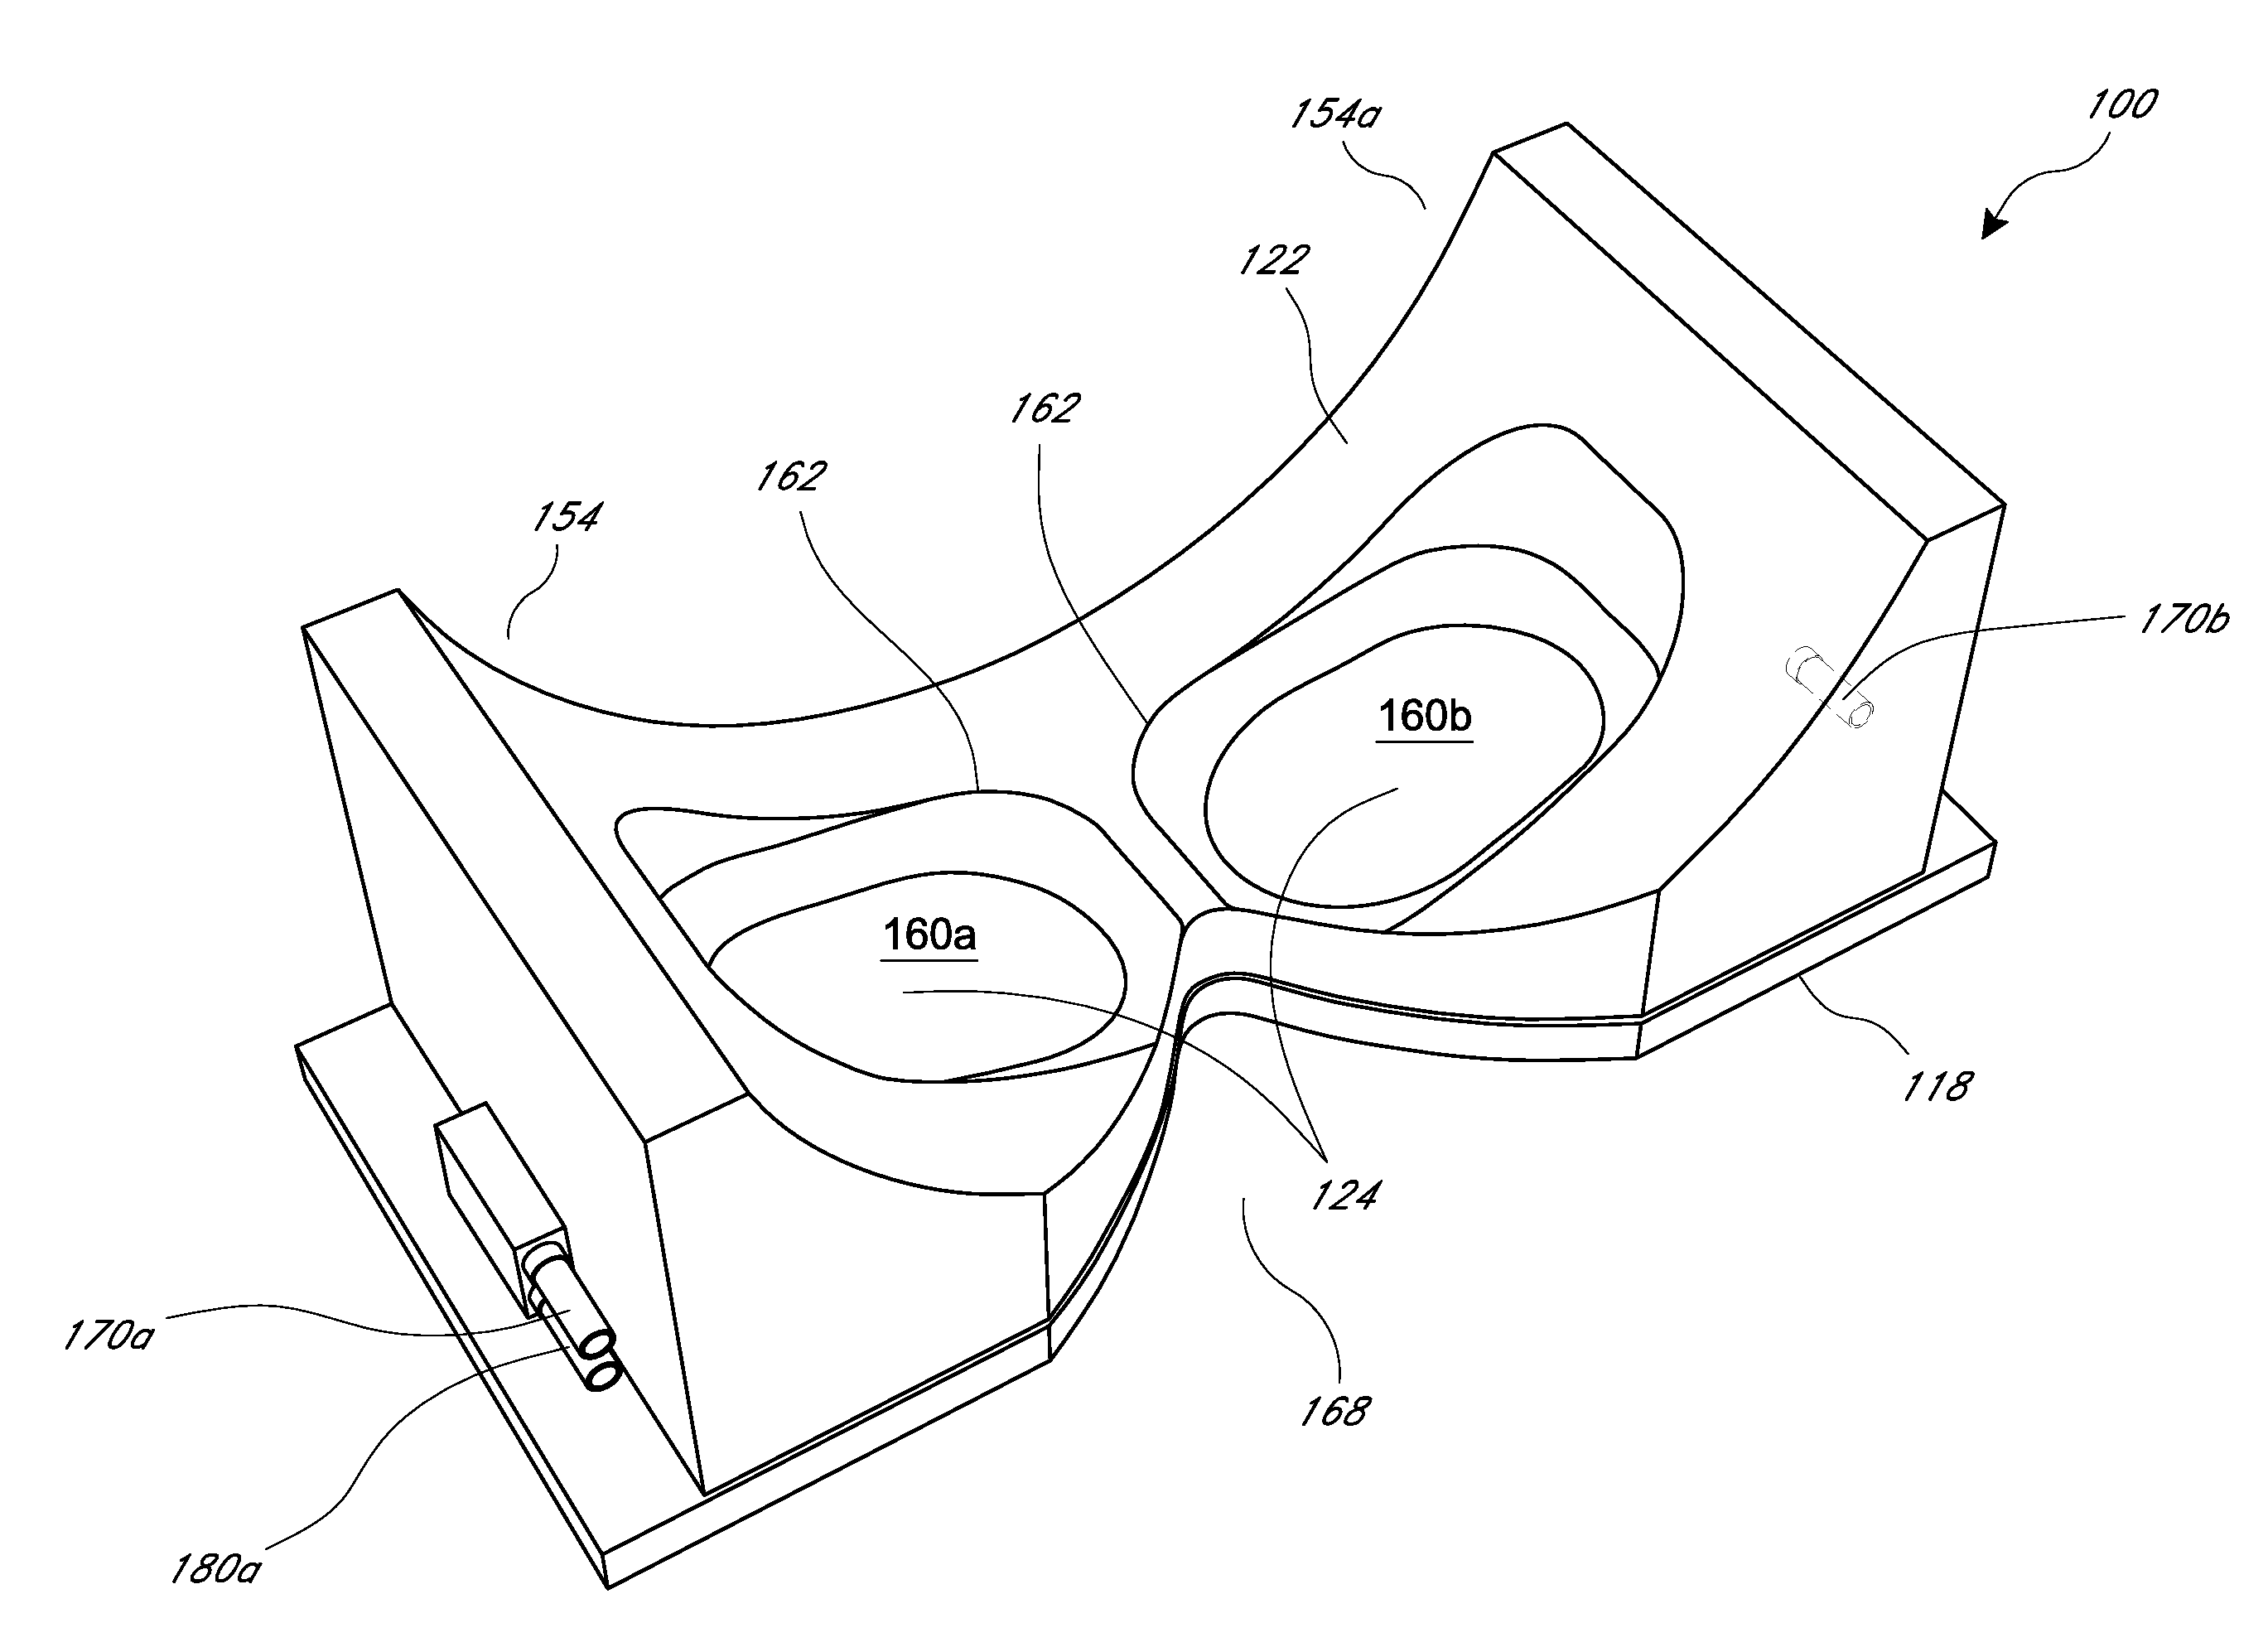 Inflatable medical interfaces and other medcal devices, systems, and methods